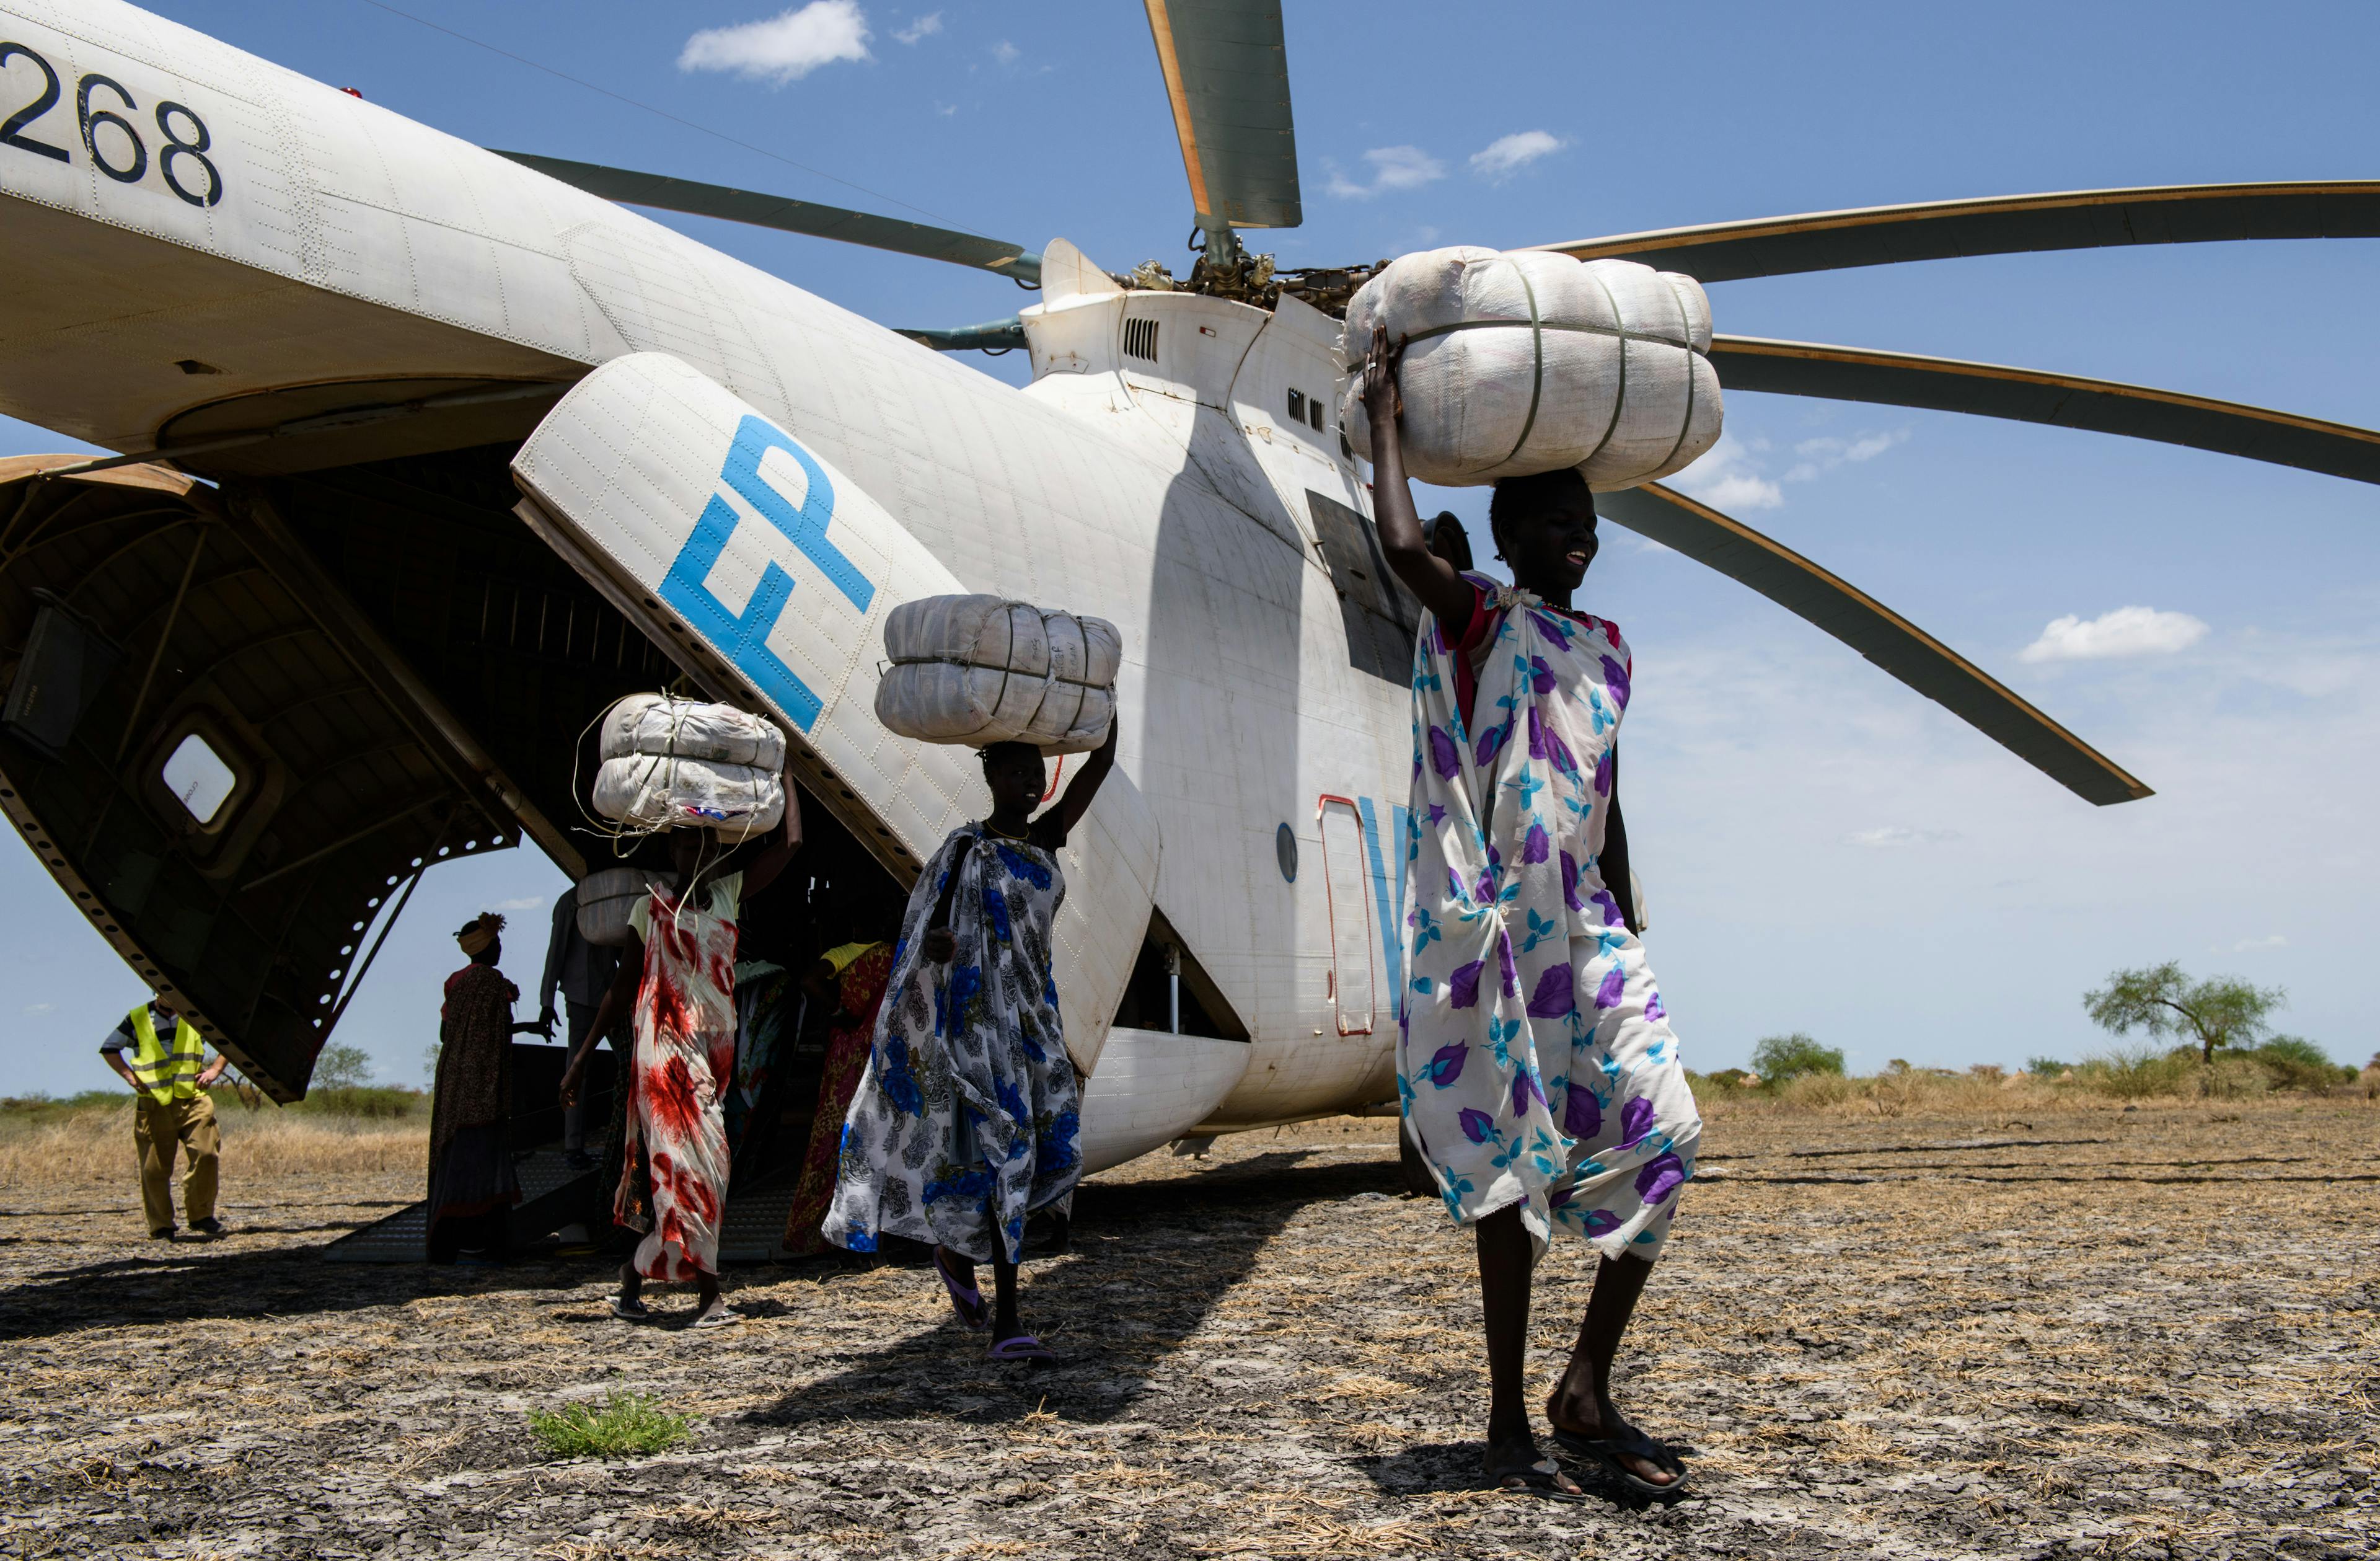 Porters carry bales of mosquito nets from a helicopter during a Rapid Response Mission in the village of Aburoc, South Sudan.